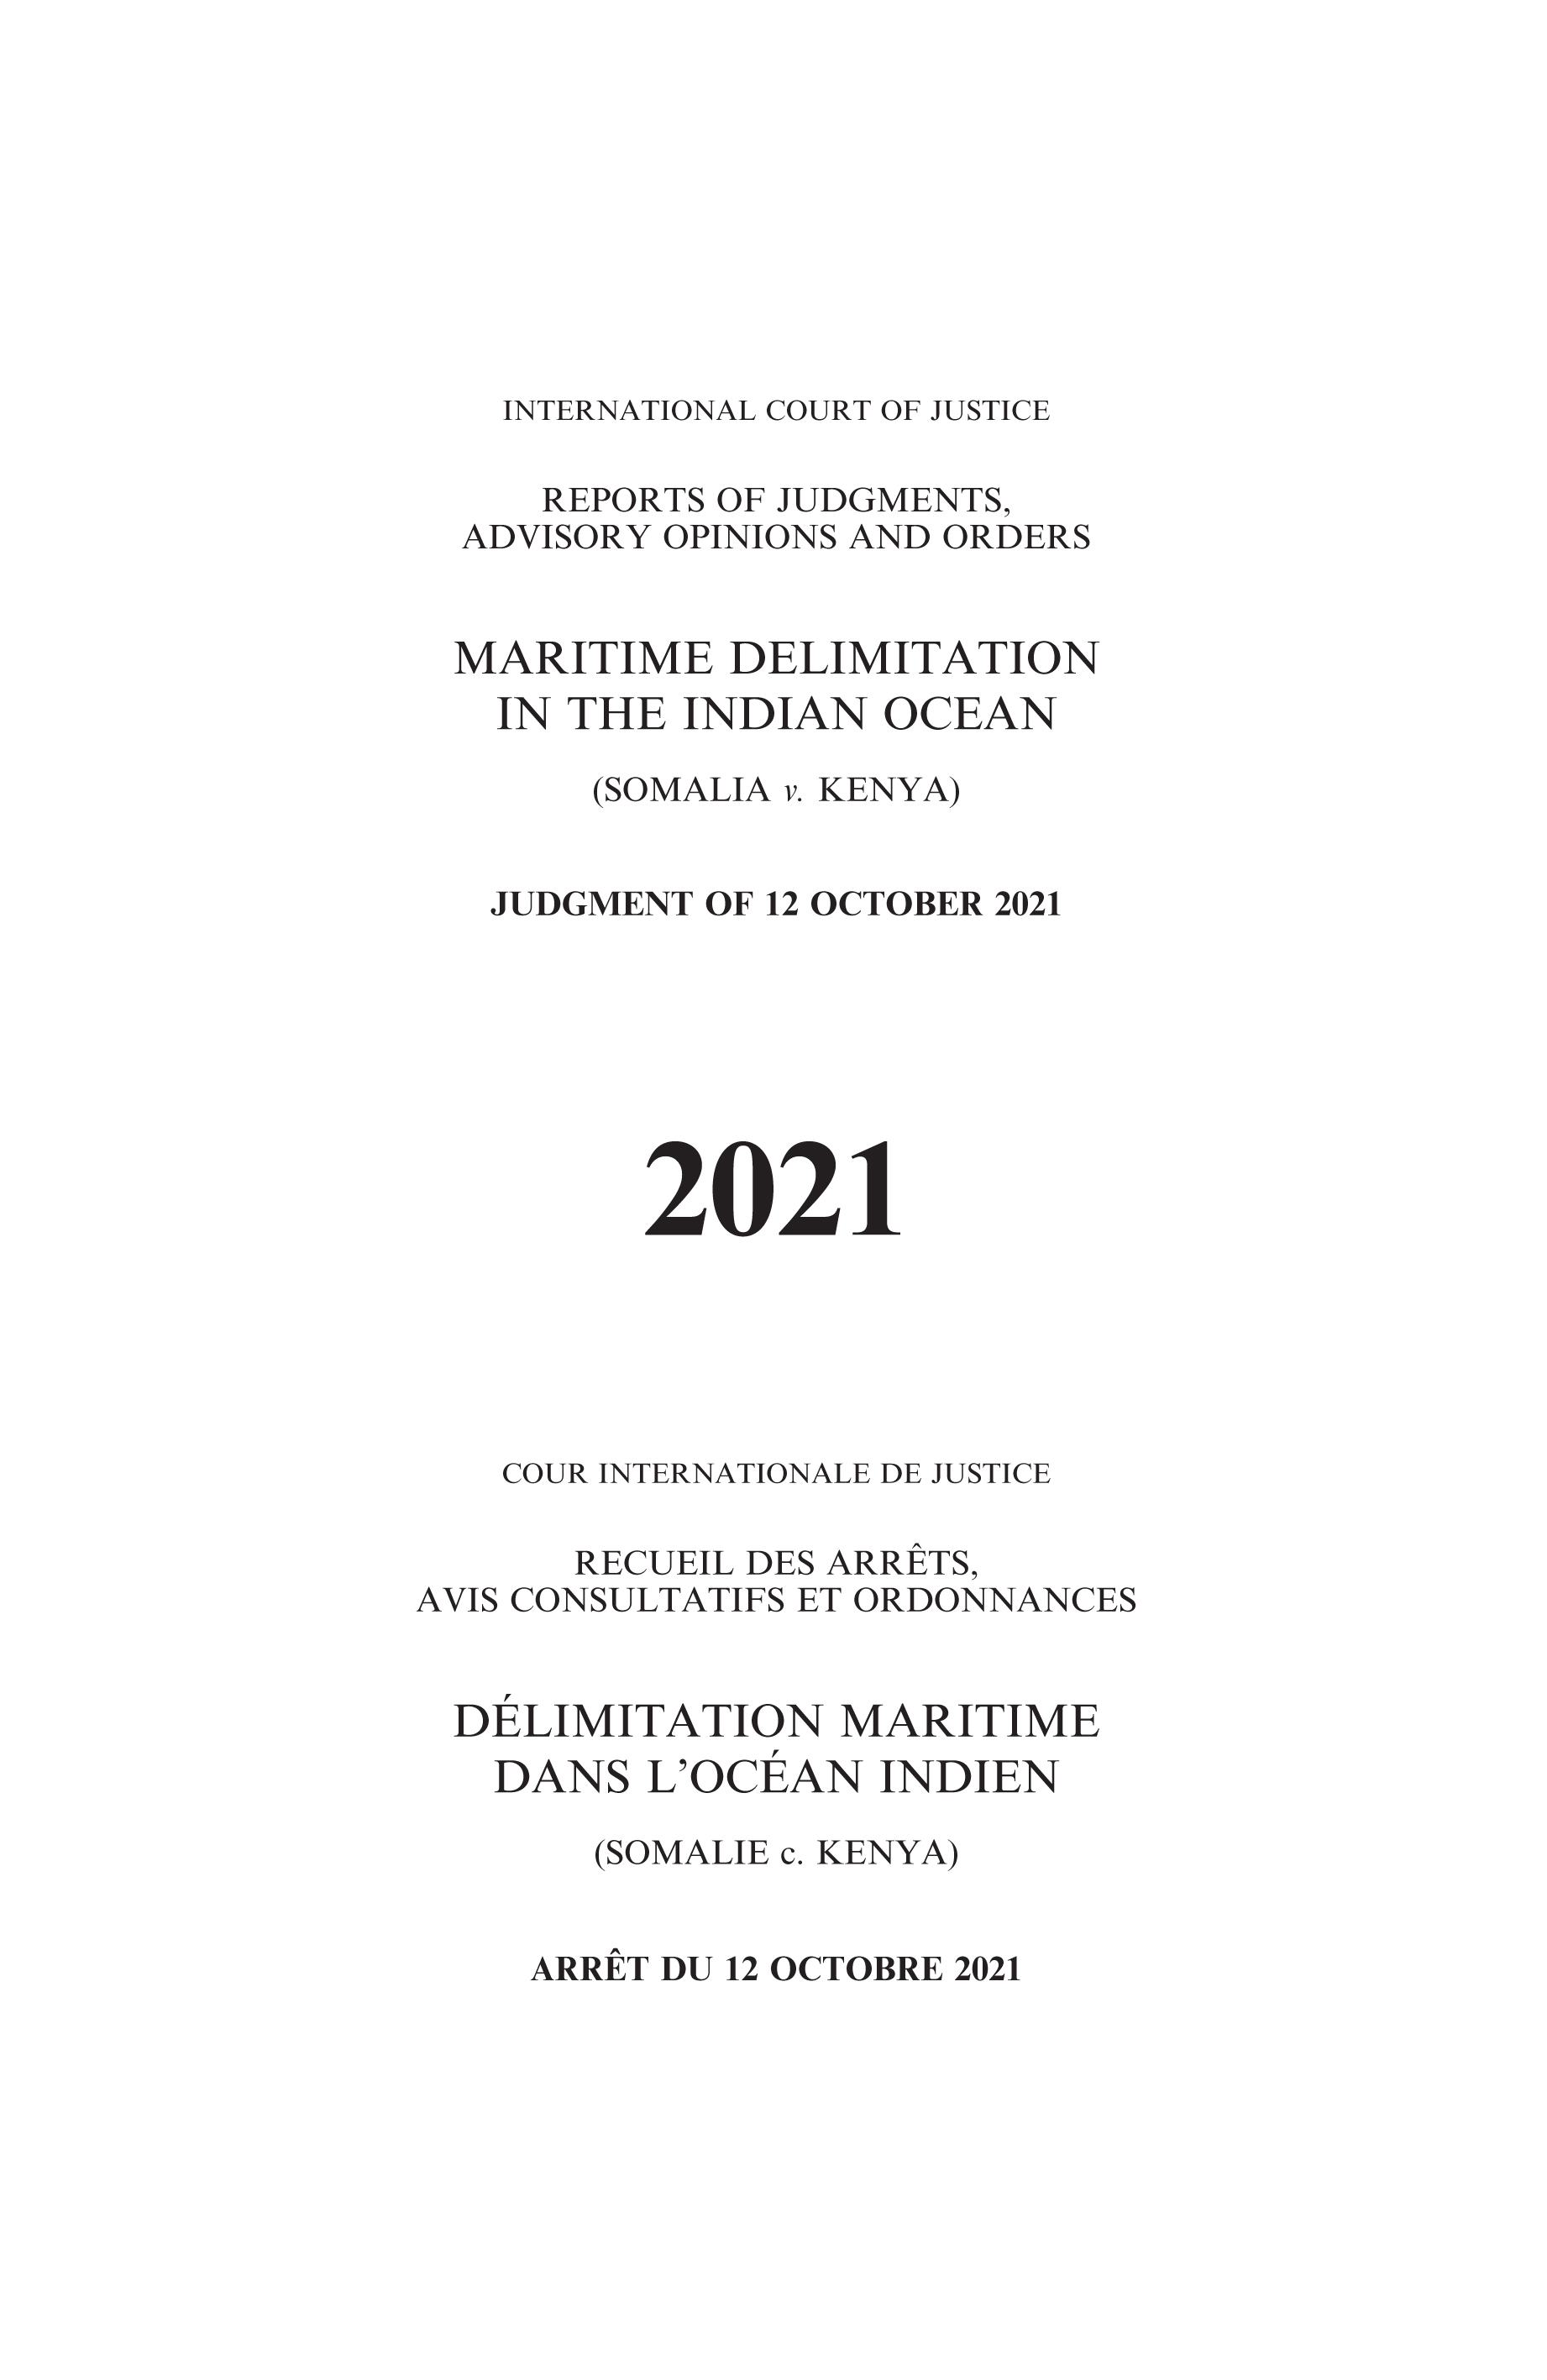 image of Reports of Judgments, Advisory Opinions and Orders: Maritime Delimitation in the Indian Ocean (Somalia v. Kenya)